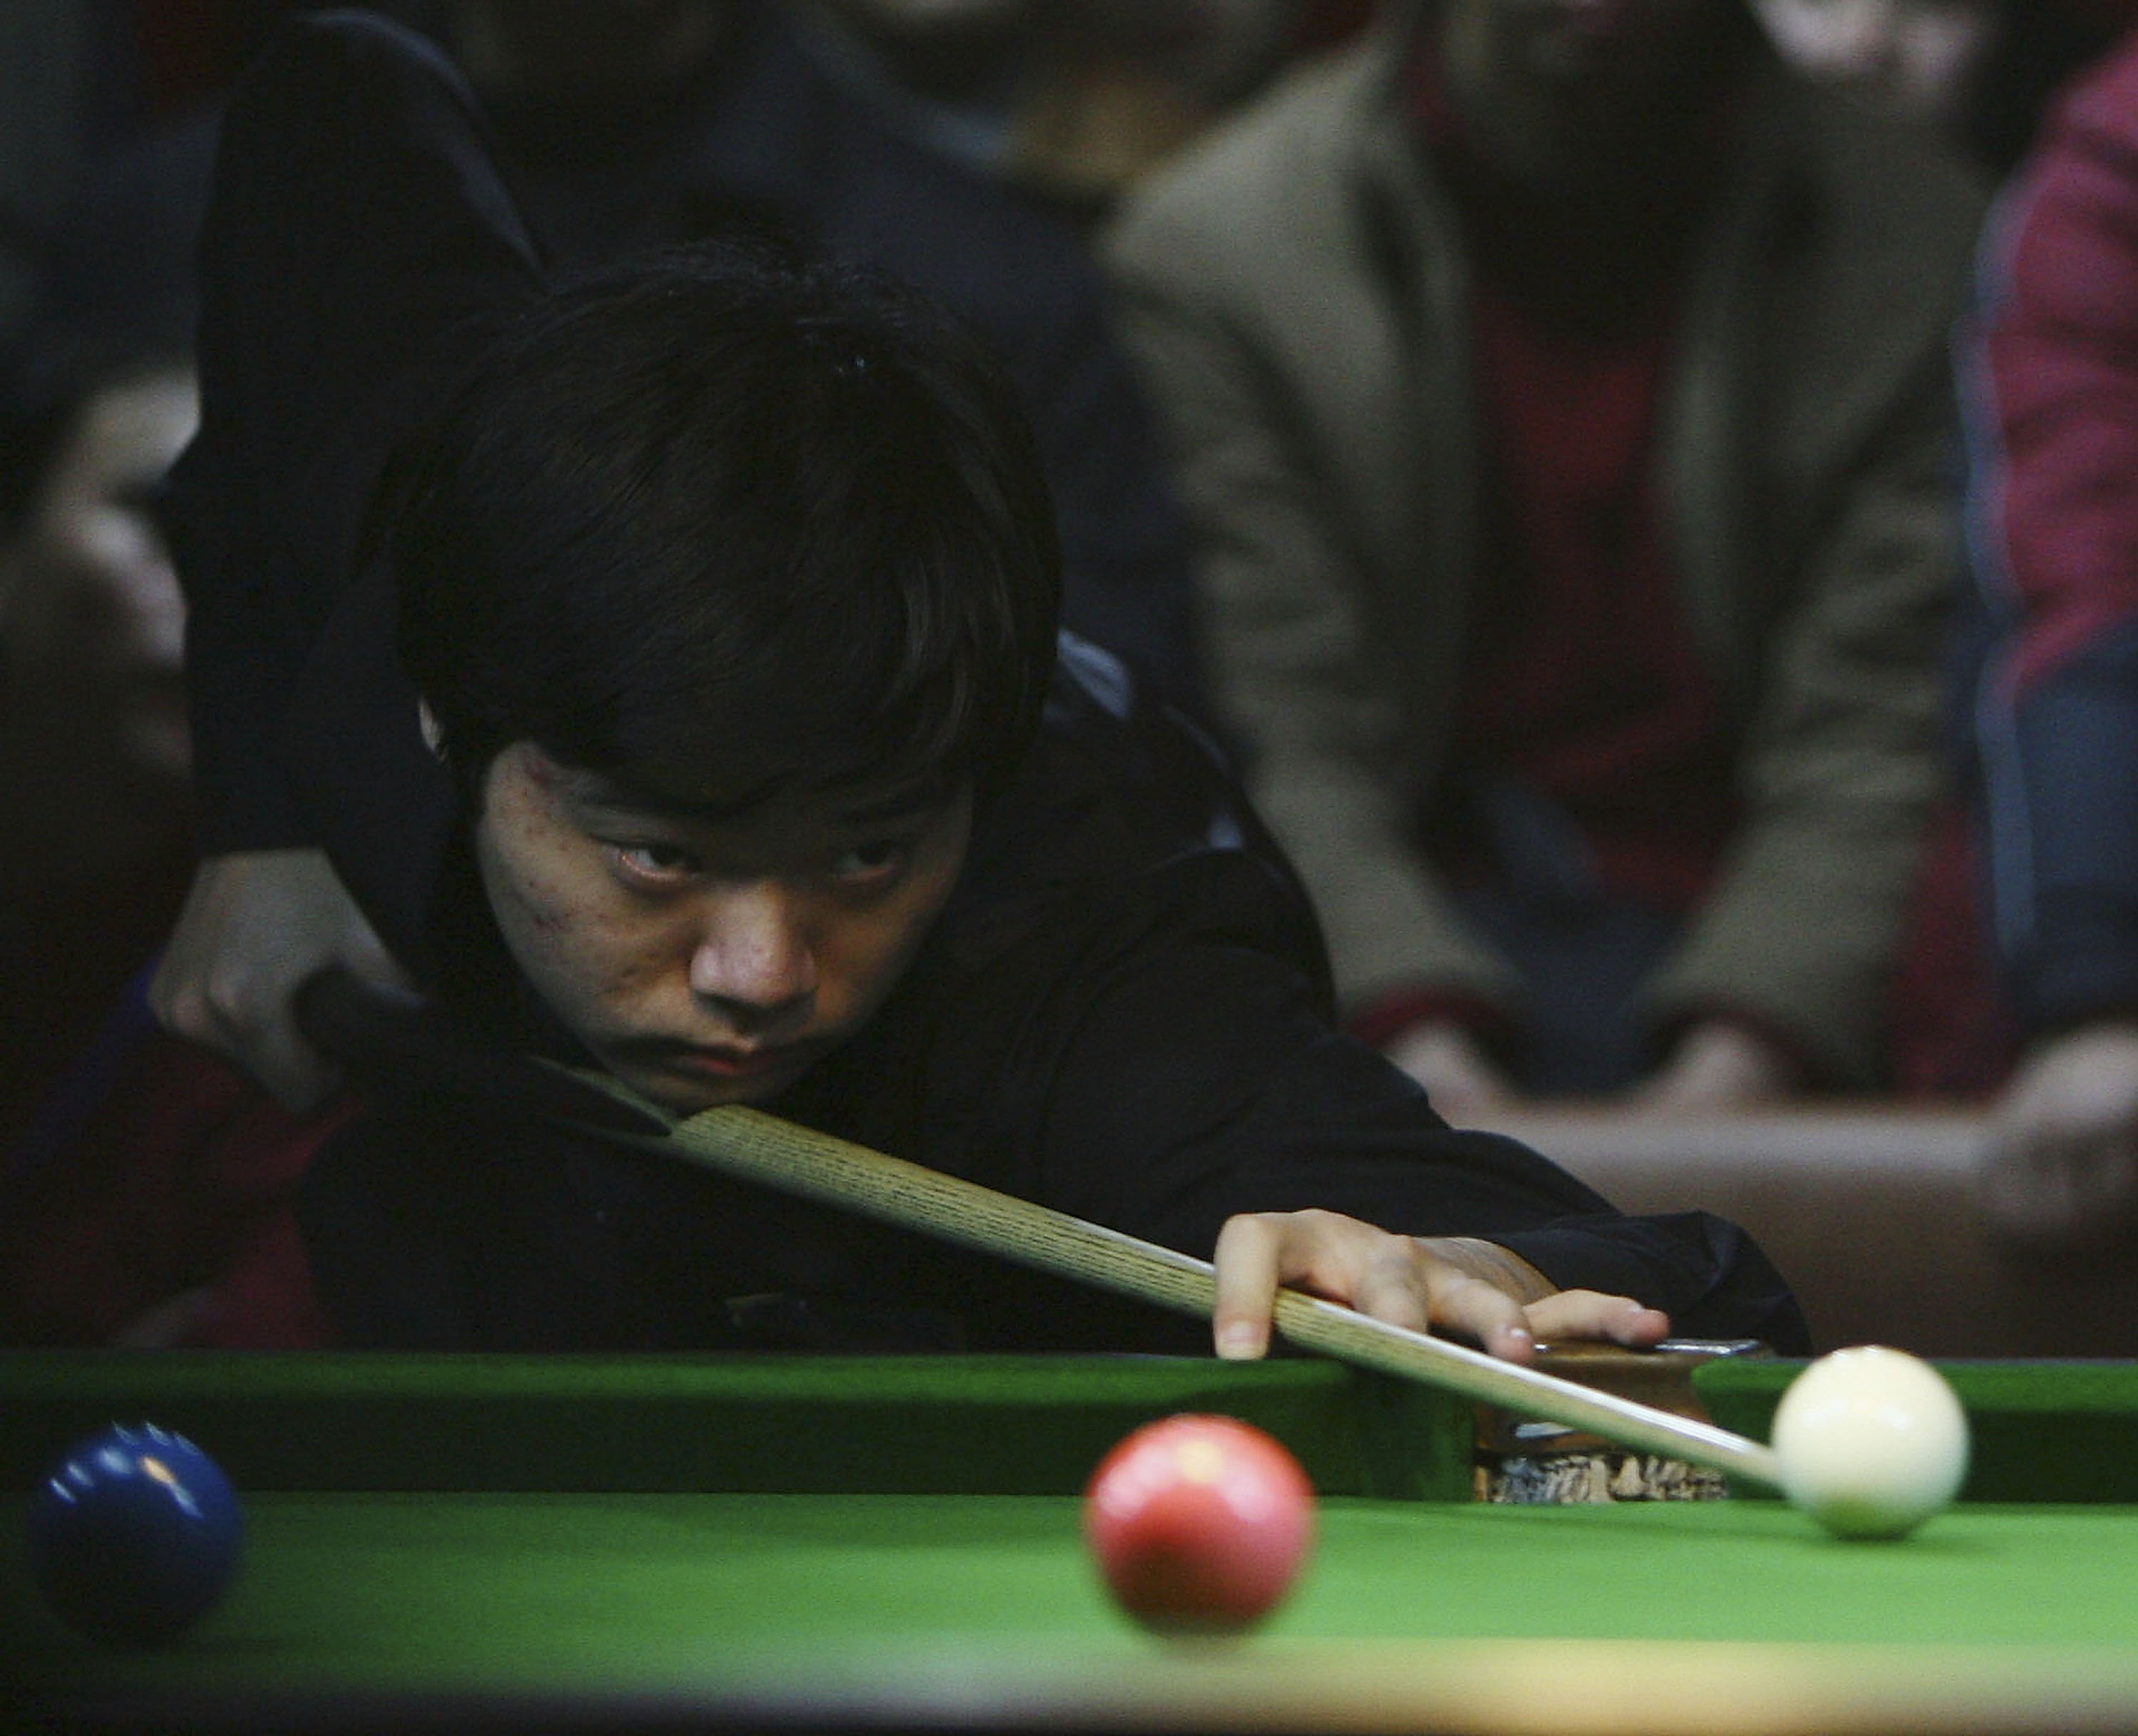 Newly-crowned U.K. champion Ding Junhui of China plays a shot during the 2005 China National Professional Billiards Ranking Tournament in Nanjing, Jiangsu Province, China, on Dec. 22, 2005. (China Photos/Getty Images)